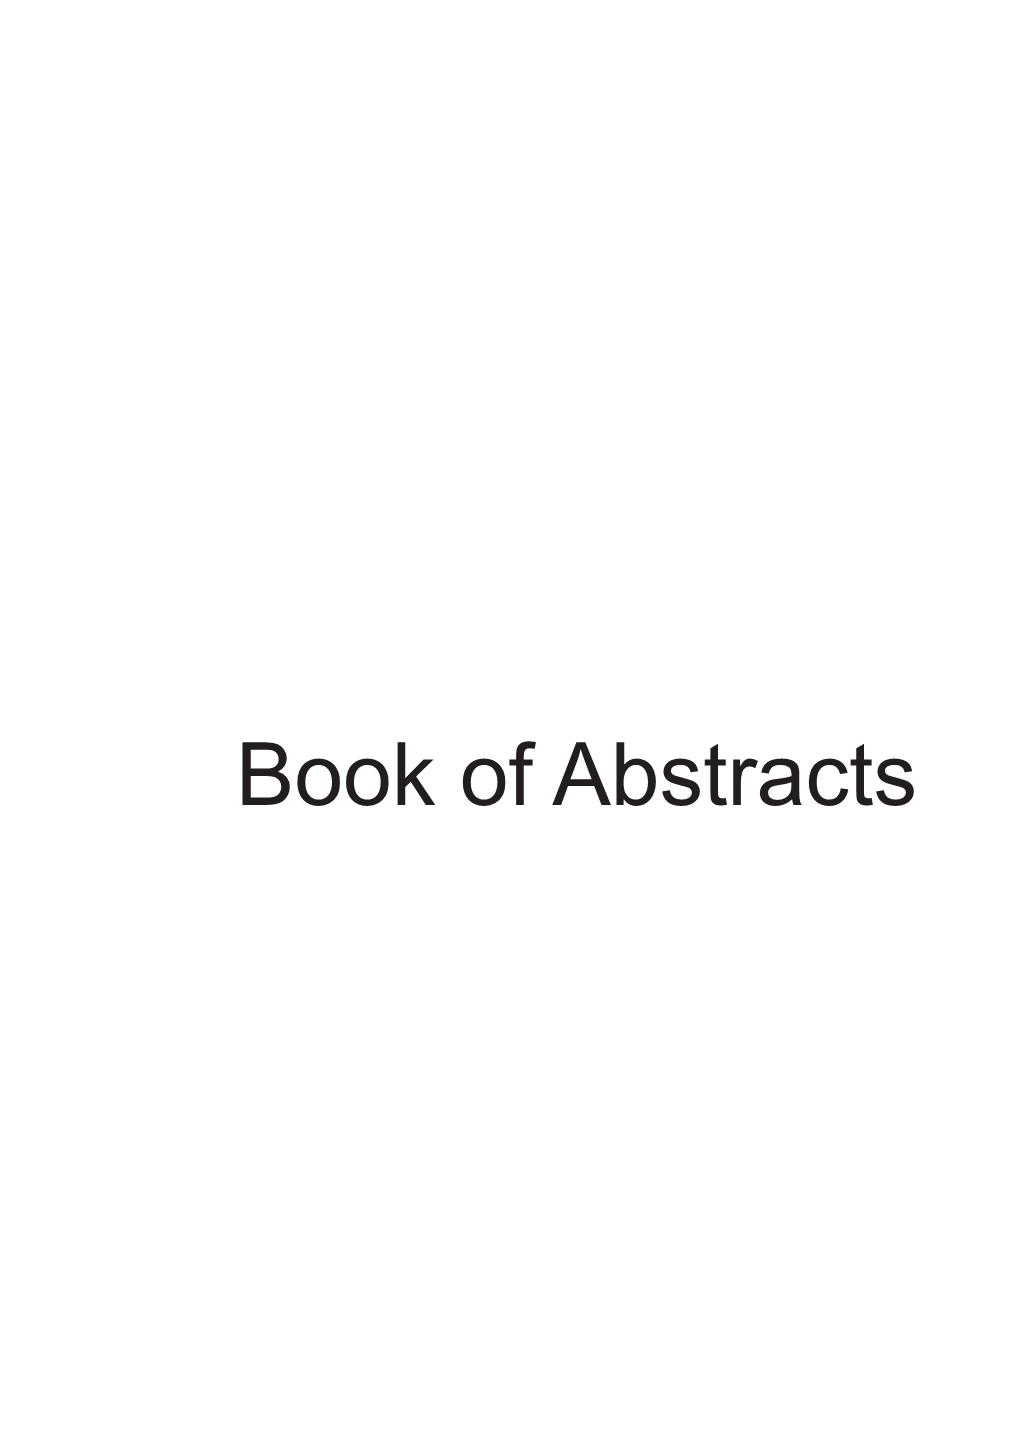 Booklet Abstracts2.Indd